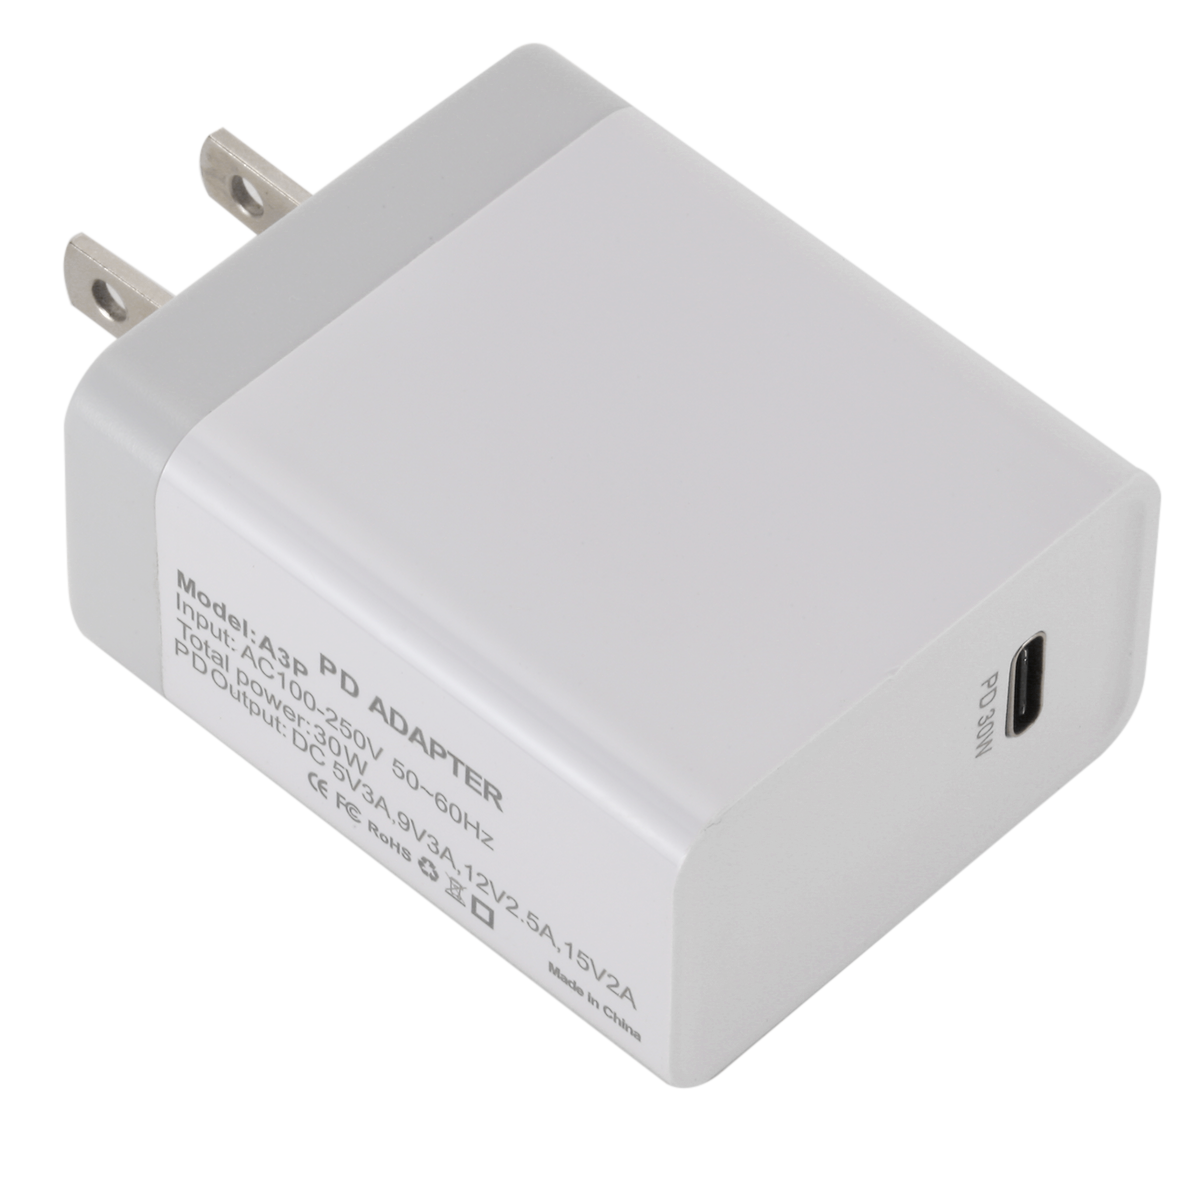 A3P-PD-Fast-Charge-Protocol-Charger-30W-Adapter-TYPE-C-Travel-Charger-AC100-250V-1797295-2